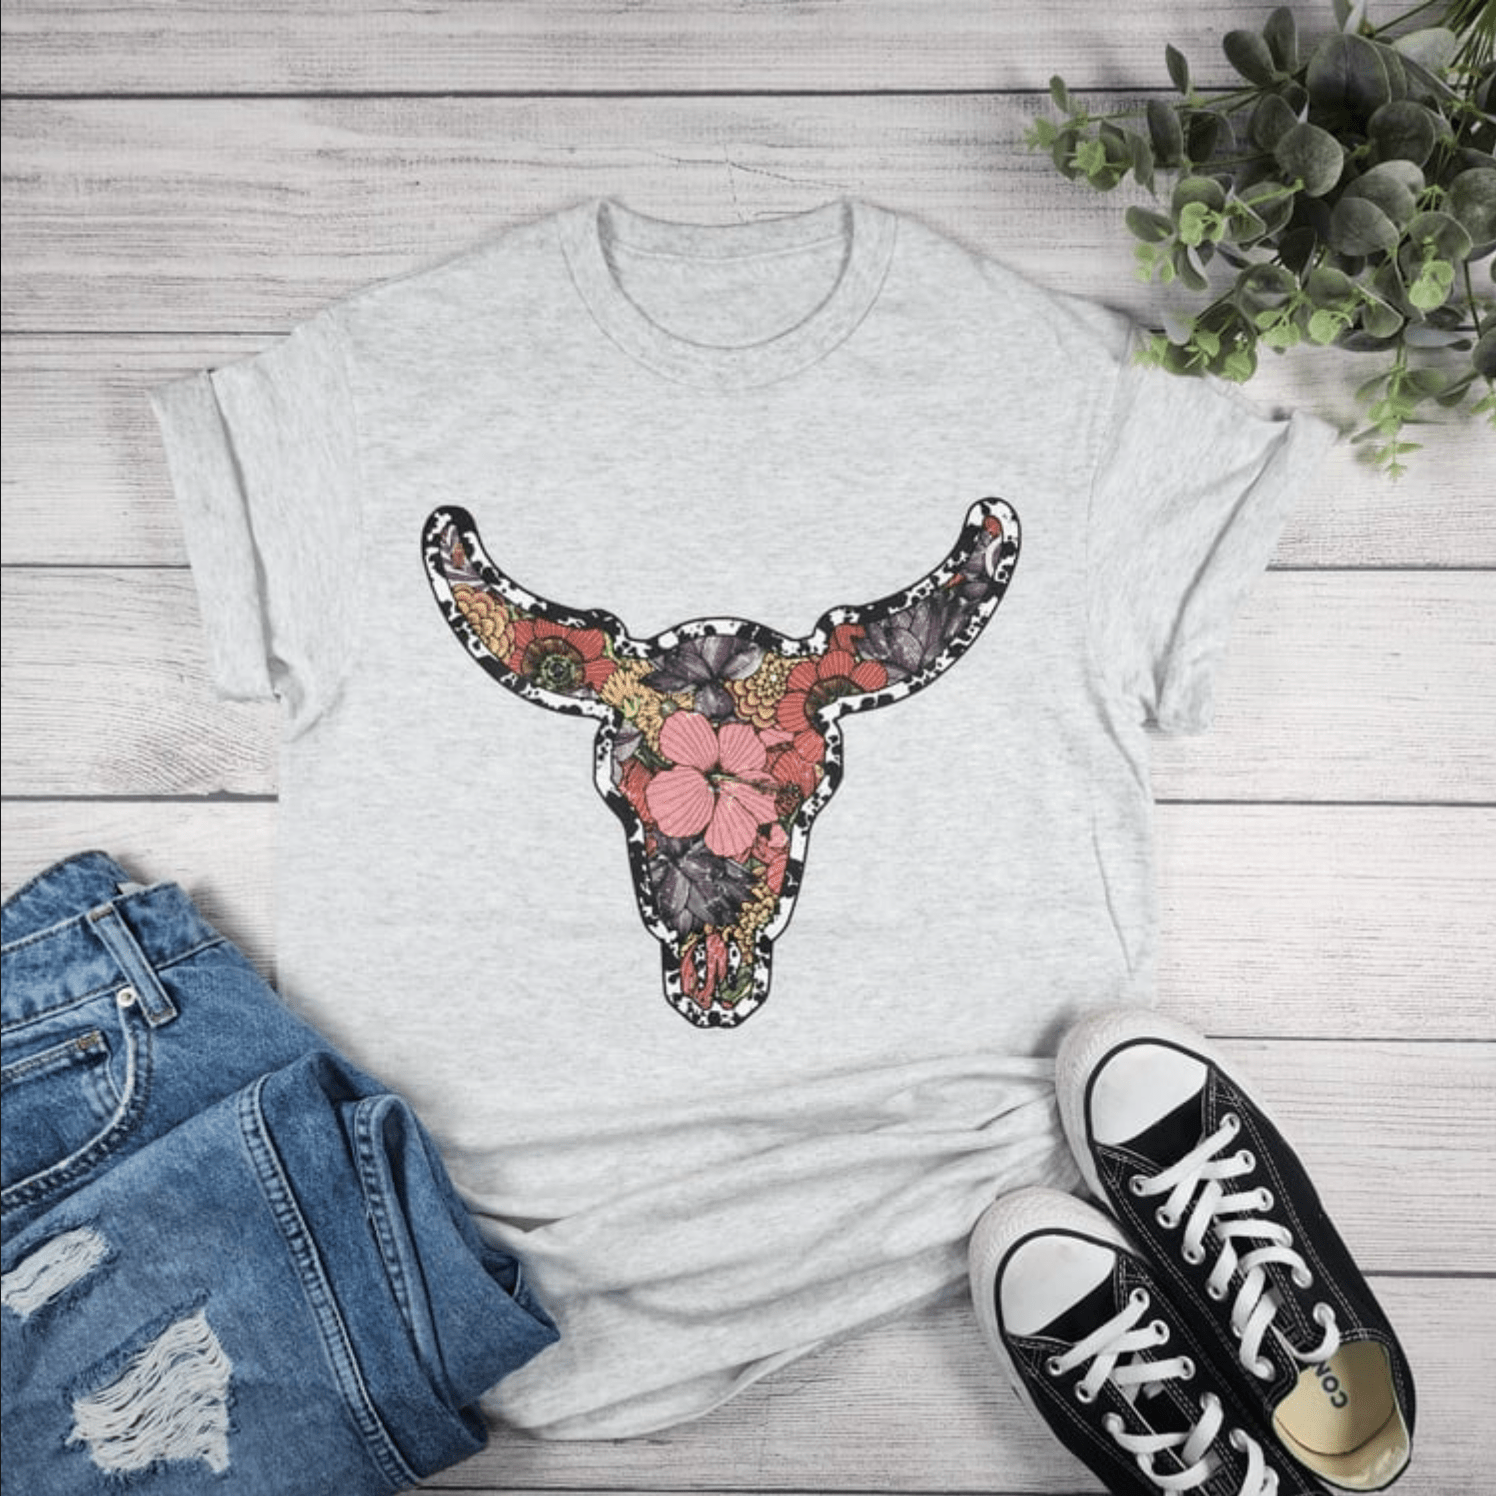 Envy Stylz Boutique Women - Apparel - Shirts - T-Shirts Flower Cow Skull Graphic Tee